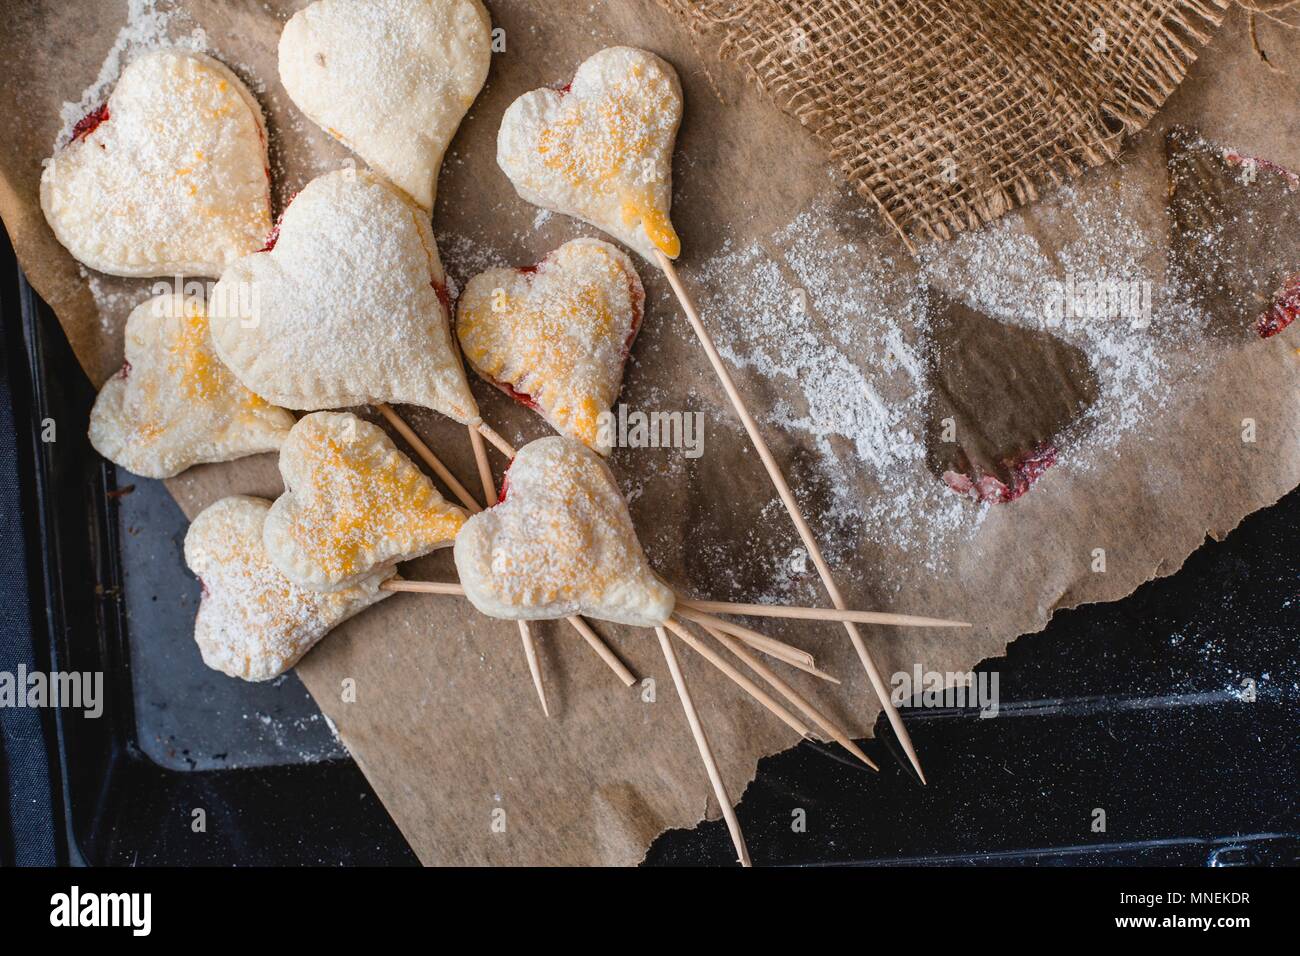 Heart-shaped jam-filled biscuits on sticks Stock Photo